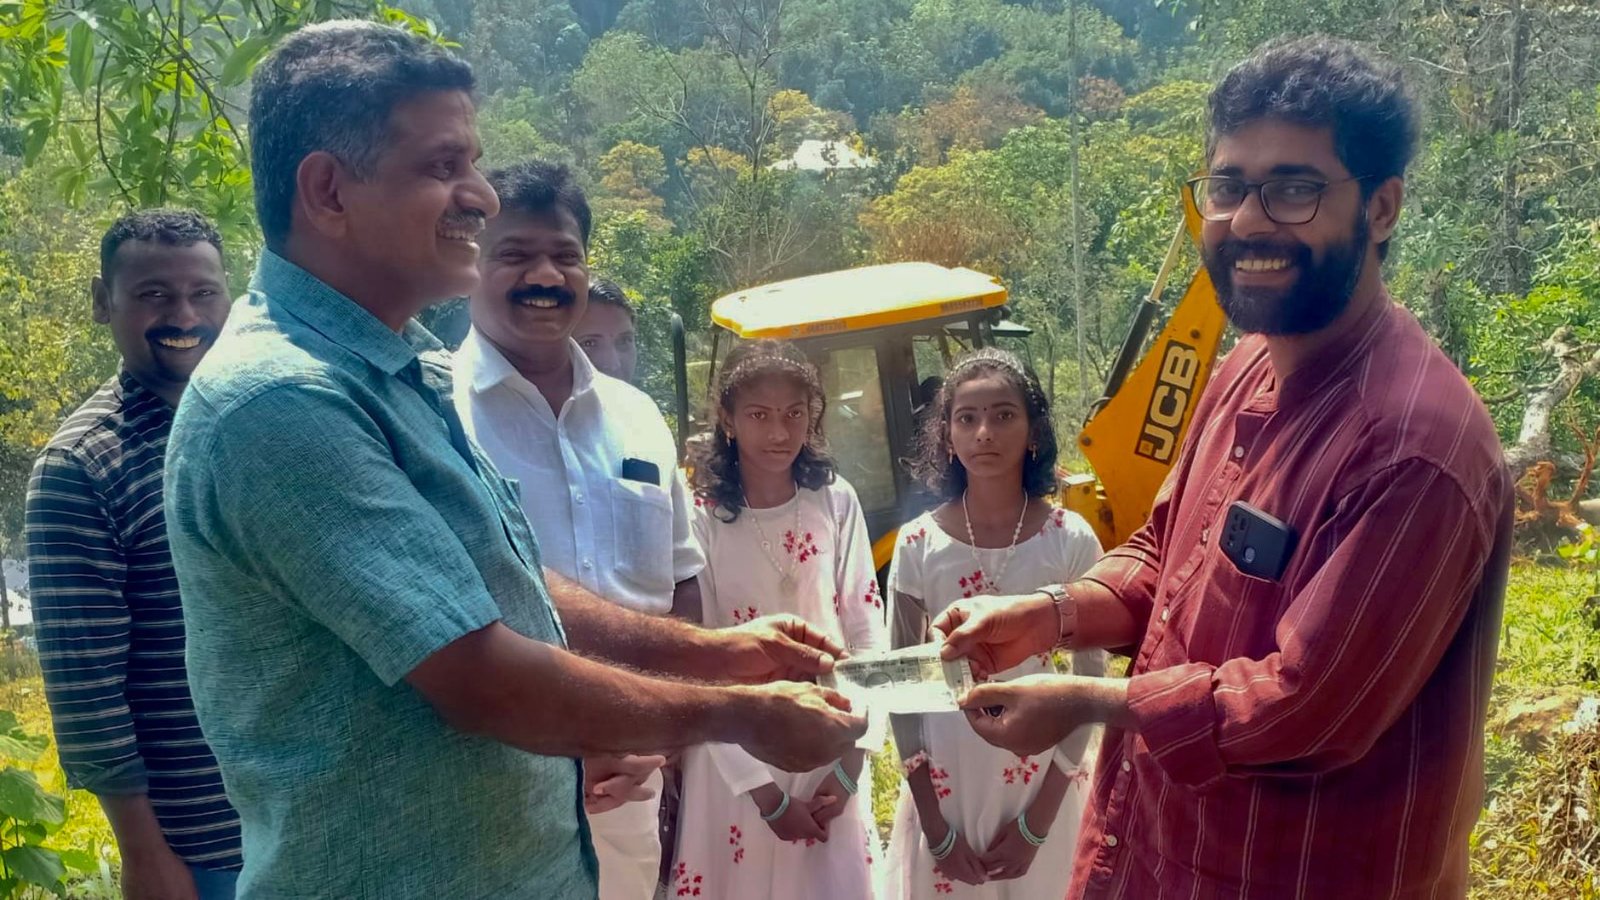 School Managing Committee Chairman G Biju handing over a cheque to House Construction Committee president Shiju Kumar. Also seen are the students - Arya and Meera.